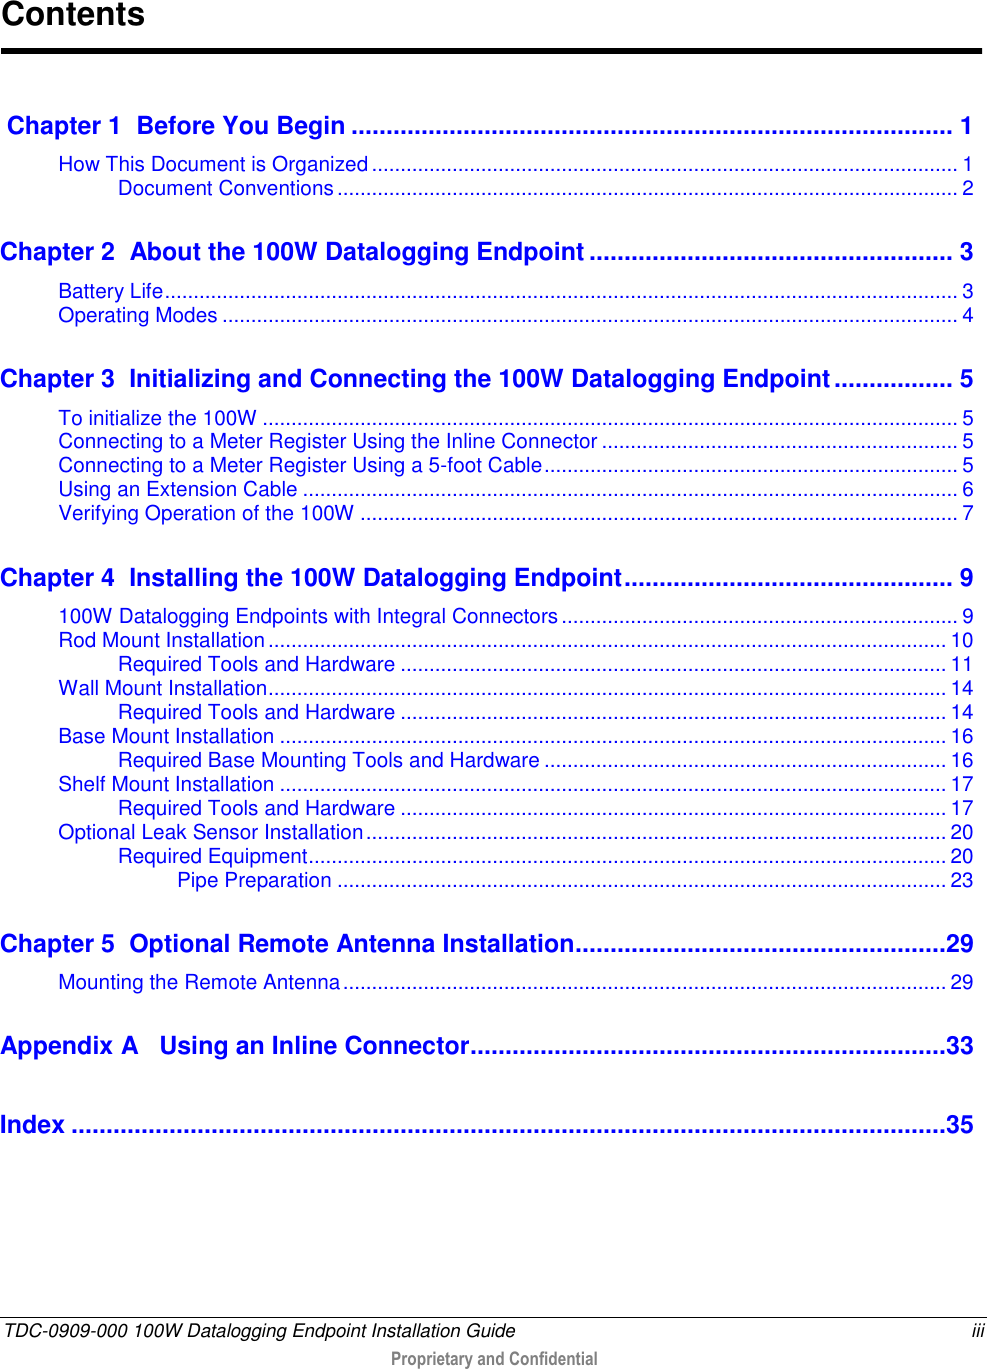  TDC-0909-000 100W Datalogging Endpoint Installation Guide  iii  Proprietary and Confidential   Chapter 1  Before You Begin ...................................................................................... 1 How This Document is Organized ...................................................................................................... 1 Document Conventions ............................................................................................................ 2 Chapter 2  About the 100W Datalogging Endpoint .................................................... 3 Battery Life .......................................................................................................................................... 3 Operating Modes ................................................................................................................................ 4 Chapter 3  Initializing and Connecting the 100W Datalogging Endpoint ................. 5 To initialize the 100W ......................................................................................................................... 5 Connecting to a Meter Register Using the Inline Connector .............................................................. 5 Connecting to a Meter Register Using a 5-foot Cable ........................................................................ 5 Using an Extension Cable .................................................................................................................. 6 Verifying Operation of the 100W ........................................................................................................ 7 Chapter 4  Installing the 100W Datalogging Endpoint ............................................... 9 100W Datalogging Endpoints with Integral Connectors ..................................................................... 9 Rod Mount Installation ...................................................................................................................... 10 Required Tools and Hardware ............................................................................................... 11 Wall Mount Installation ...................................................................................................................... 14 Required Tools and Hardware ............................................................................................... 14 Base Mount Installation .................................................................................................................... 16 Required Base Mounting Tools and Hardware ...................................................................... 16 Shelf Mount Installation .................................................................................................................... 17 Required Tools and Hardware ............................................................................................... 17 Optional Leak Sensor Installation ..................................................................................................... 20 Required Equipment ............................................................................................................... 20 Pipe Preparation .......................................................................................................... 23 Chapter 5  Optional Remote Antenna Installation .....................................................29 Mounting the Remote Antenna ......................................................................................................... 29 Appendix A   Using an Inline Connector ....................................................................33 Index .............................................................................................................................35   Contents 